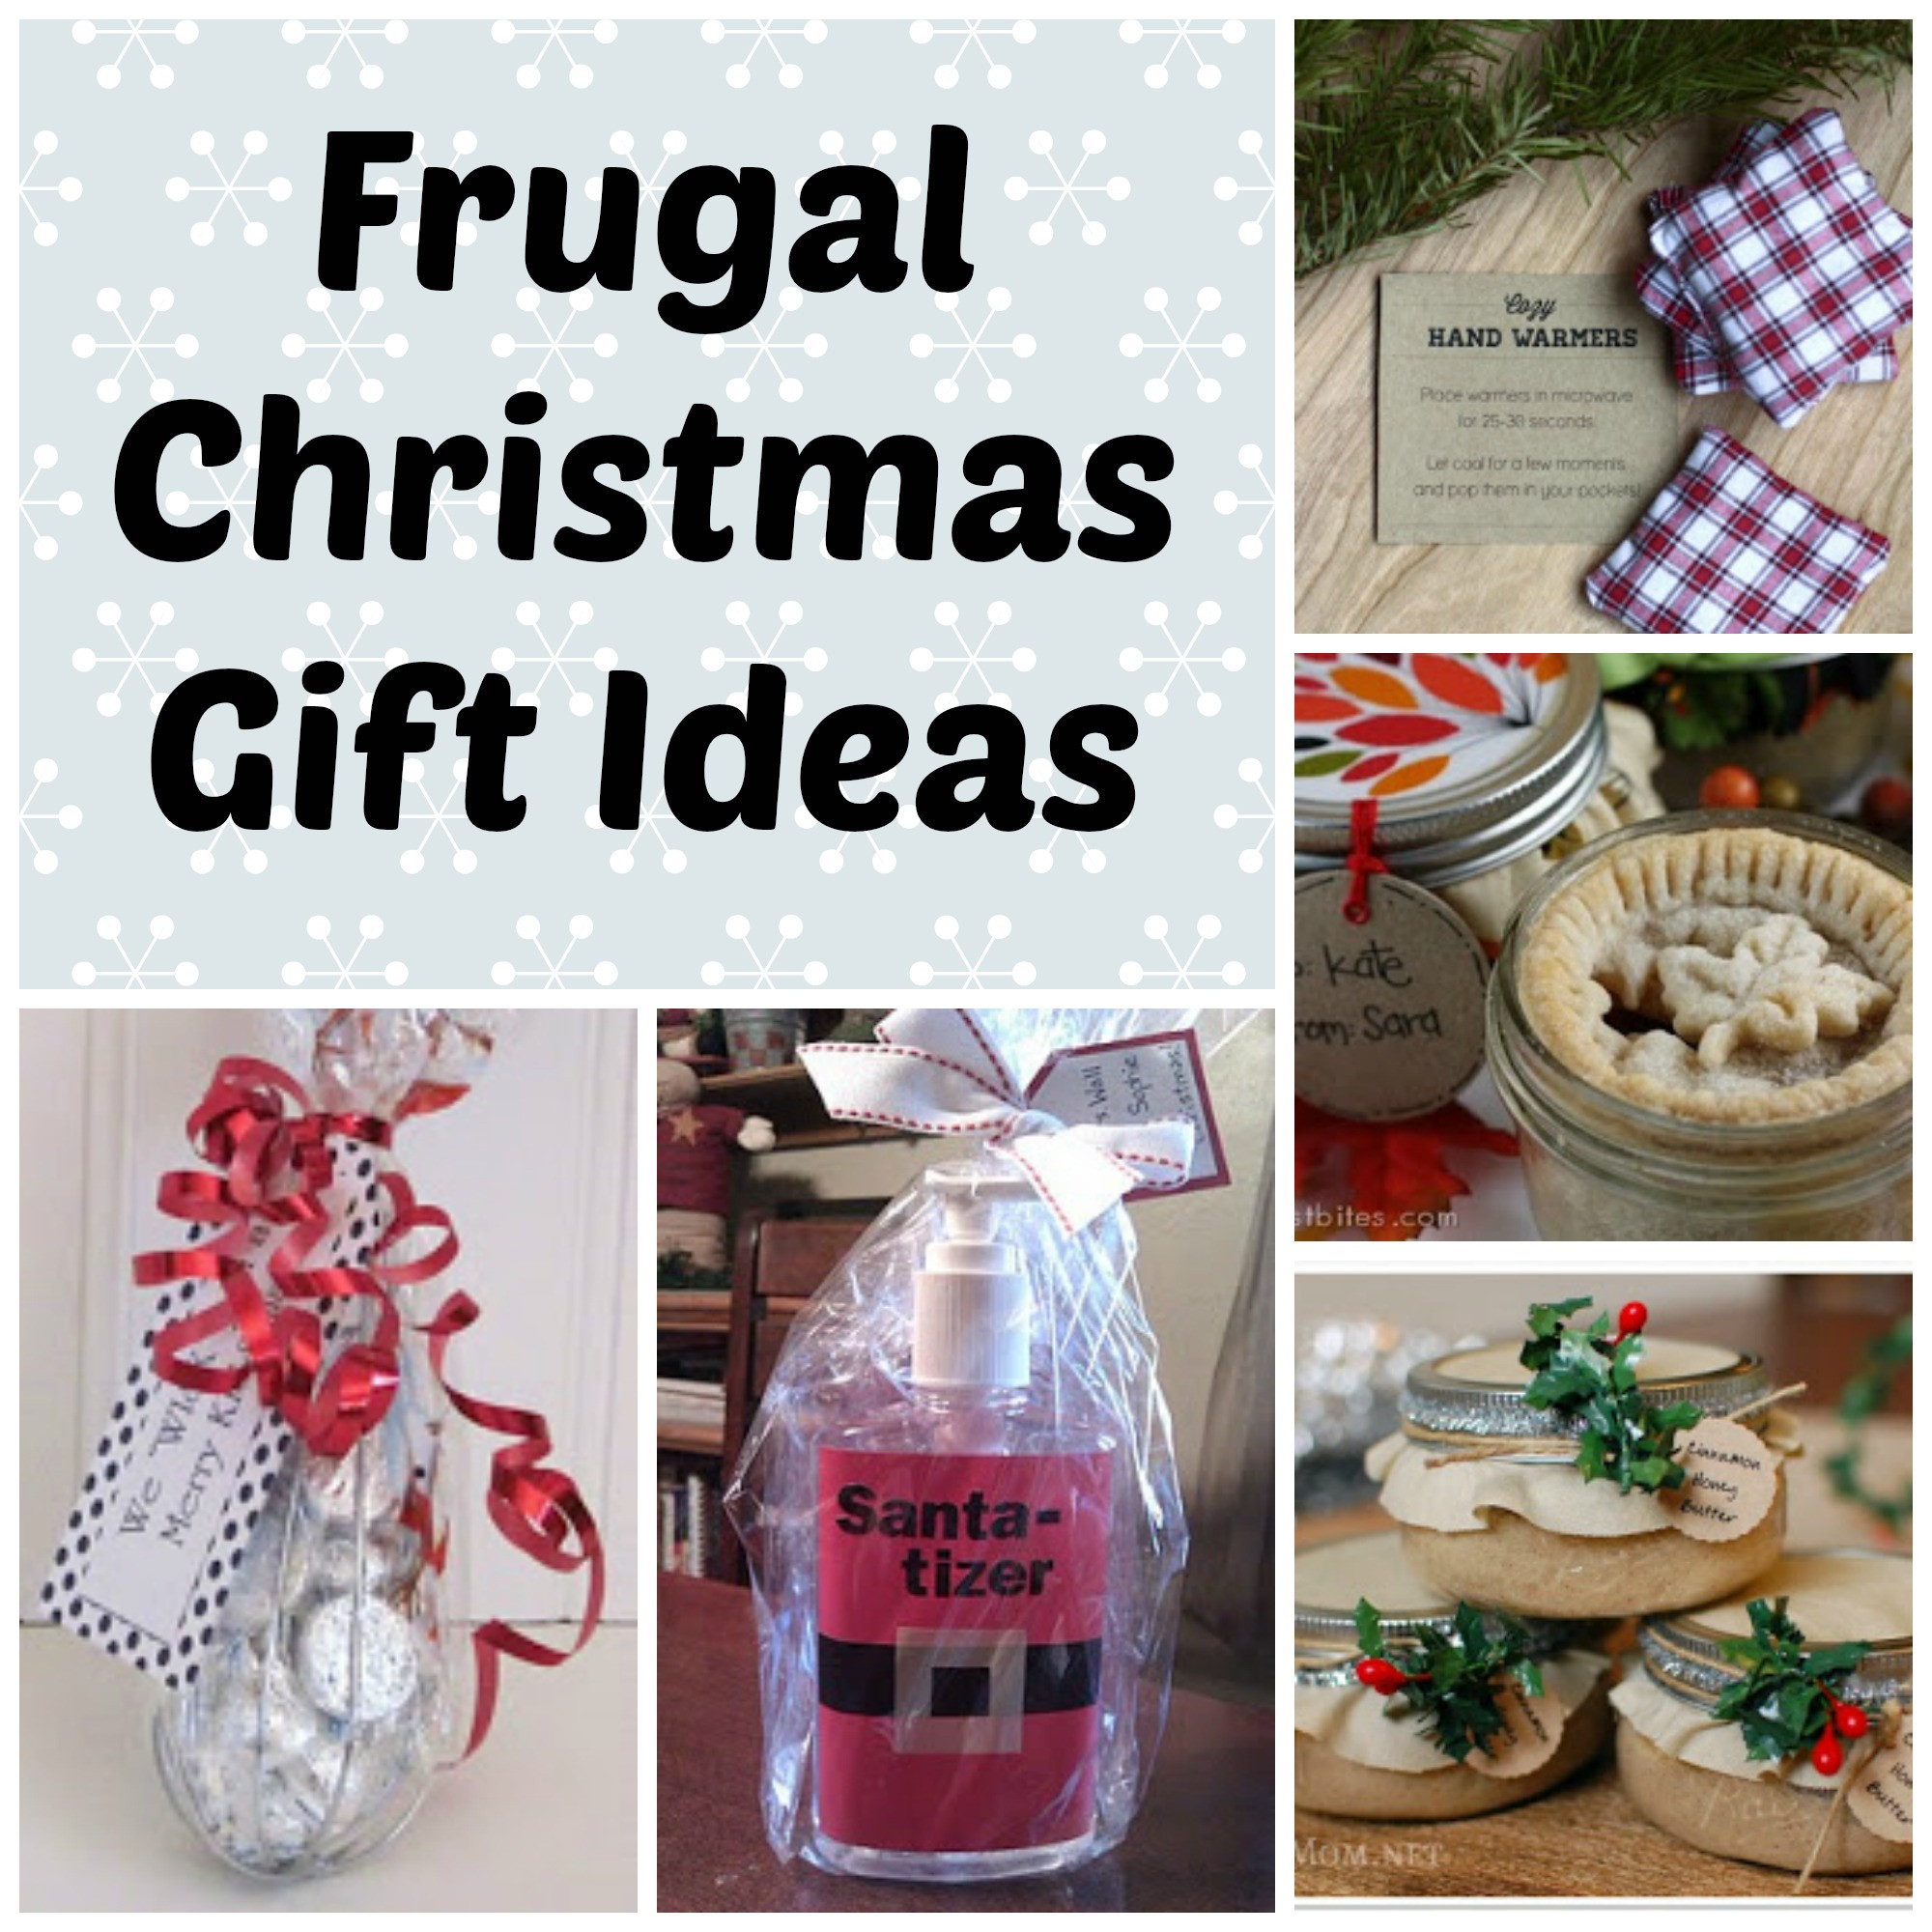 Holiday Gift Ideas For Family
 Frugal Christmas Gifts for Family Friends or Neighbors